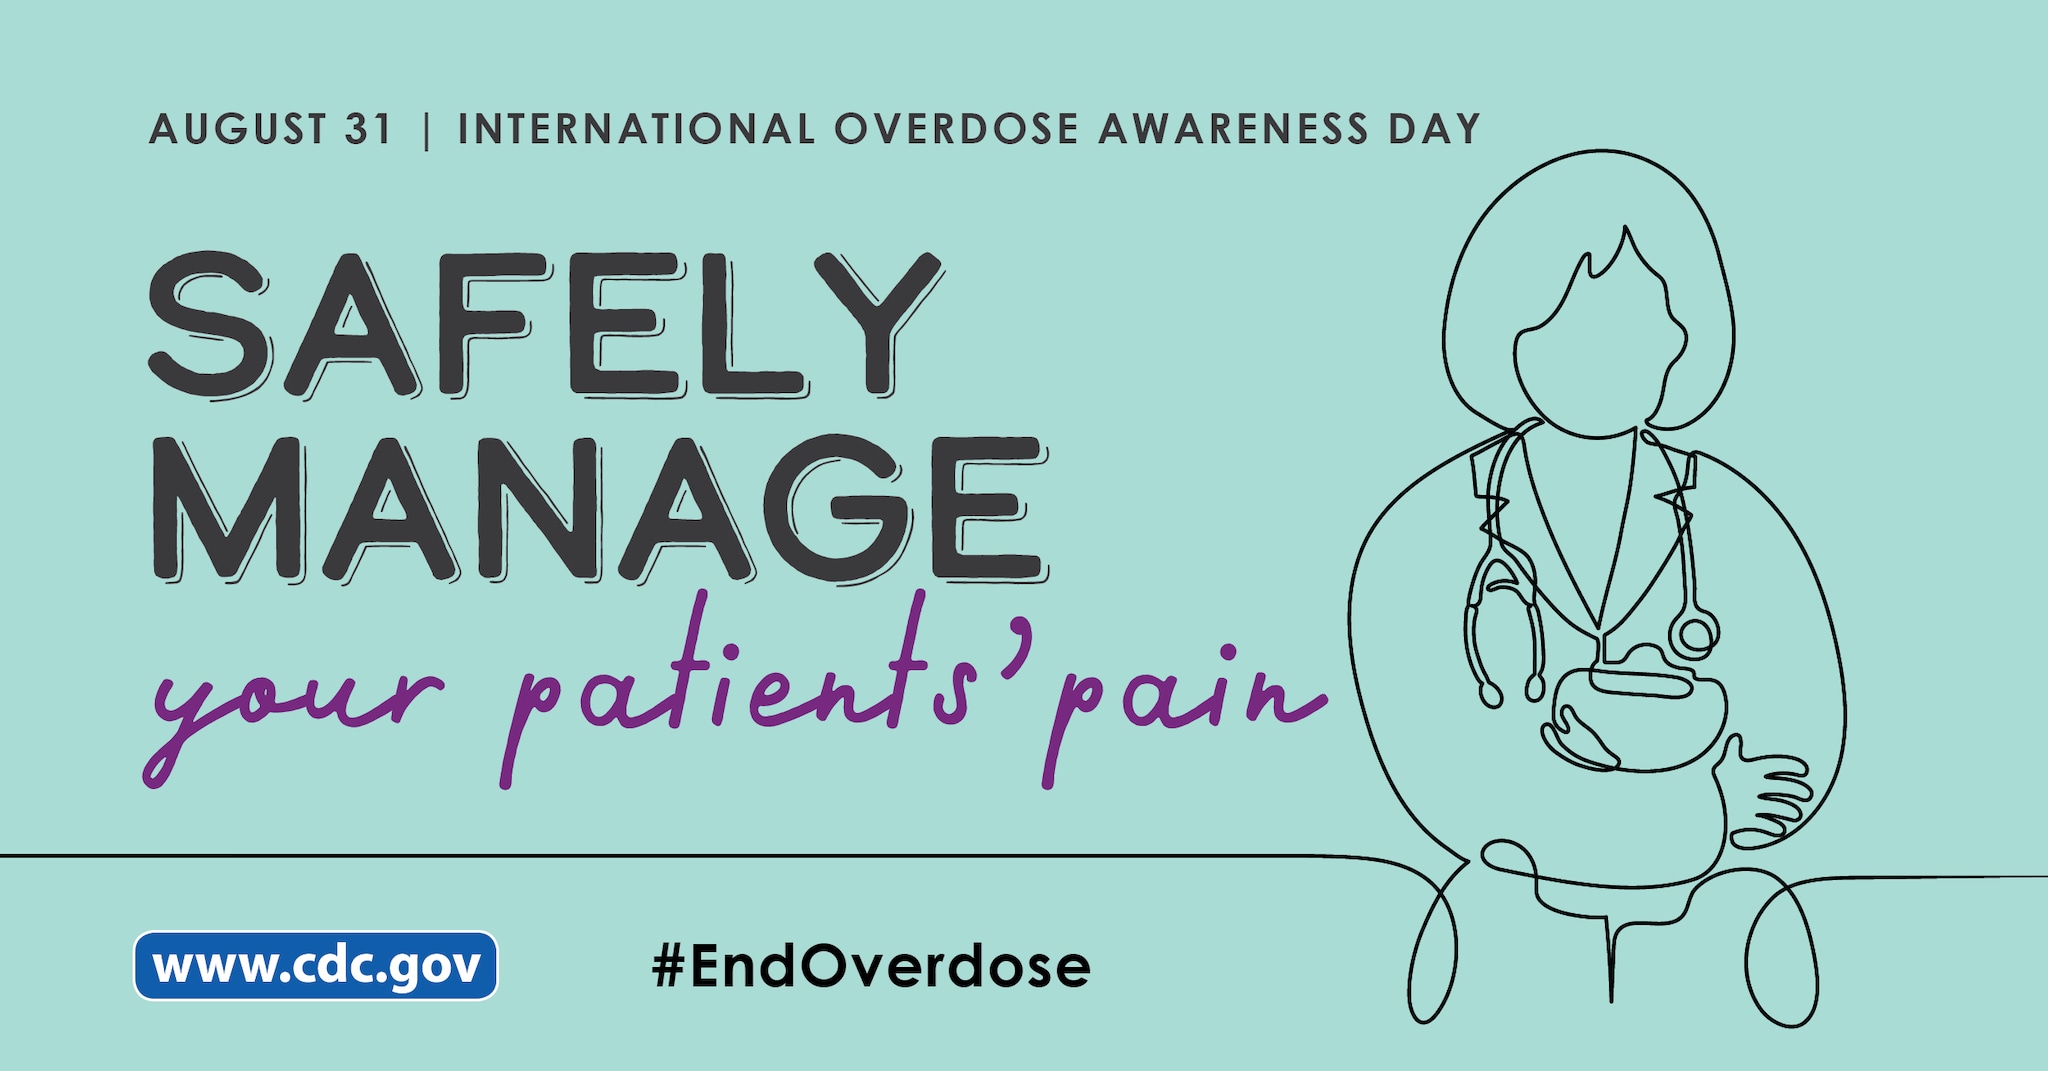 International Overdose Awareness Day  August 31.  Safely manage your patients’ pain